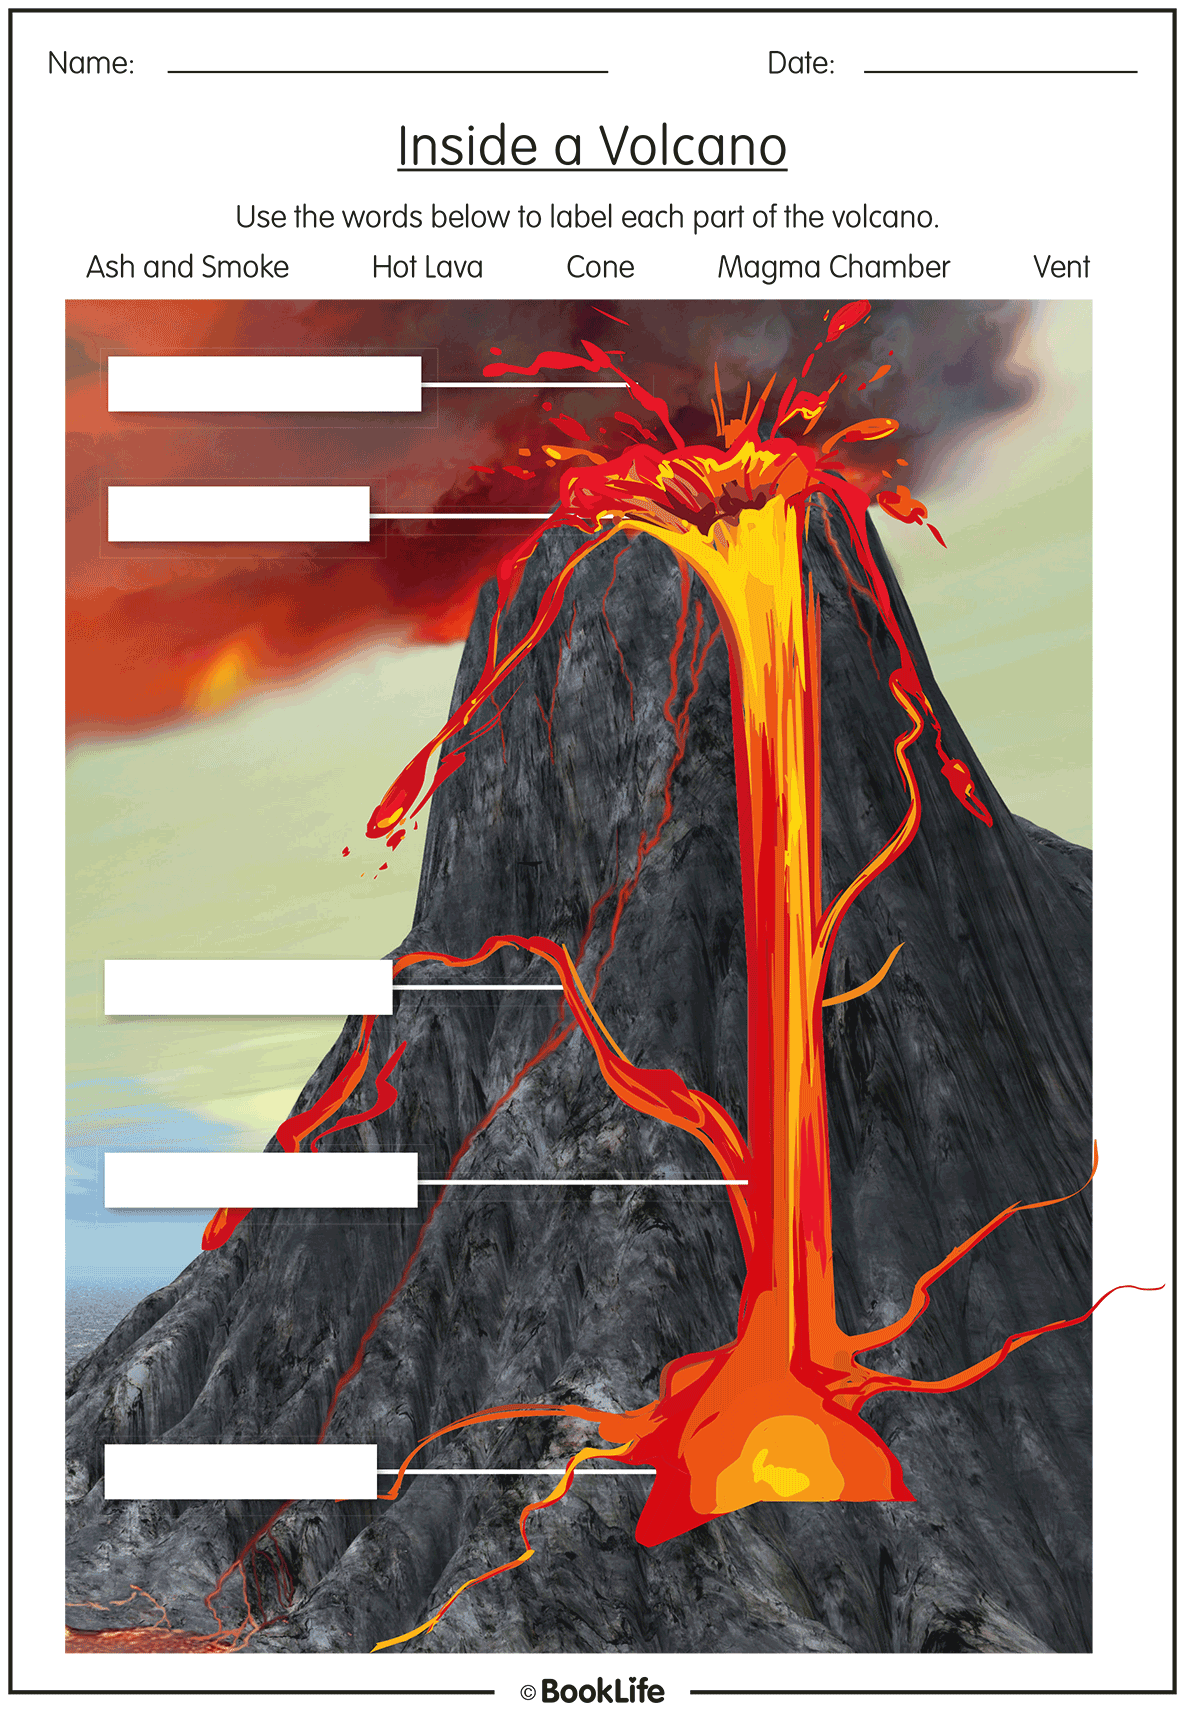 Inside a Volcano by BookLife